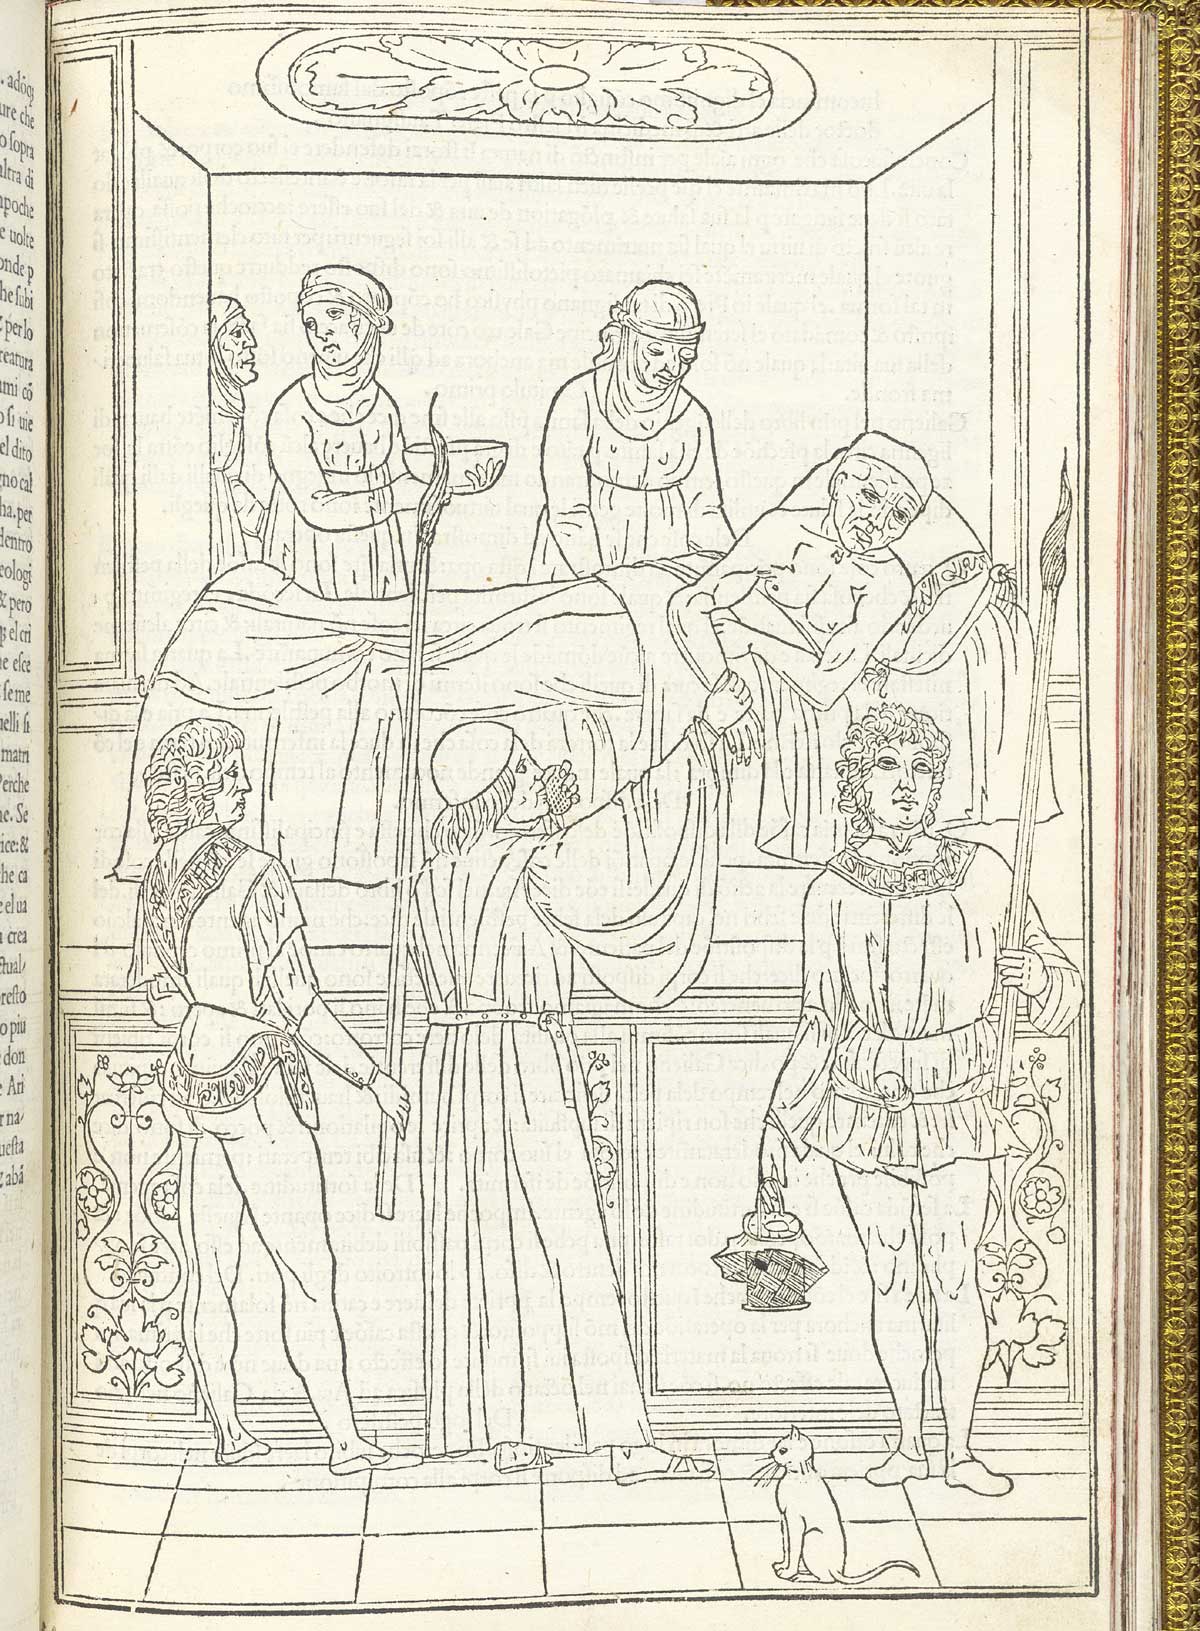 Page 51 of Johannes de Ketham's Fasiculo de medicina, featuring a visit to a plague victim. The image shows a plague victim who, judging from his face, is in bad shape but, judging from the setting, rather privileged. A physician is visiting the patient at home. He is taking the pulse, while holding to his nose a sponge soaked with wine vinegar. Three women are attending to the patient, and two men are standing next to the physician; a cat sits on the floor in lower right corner.